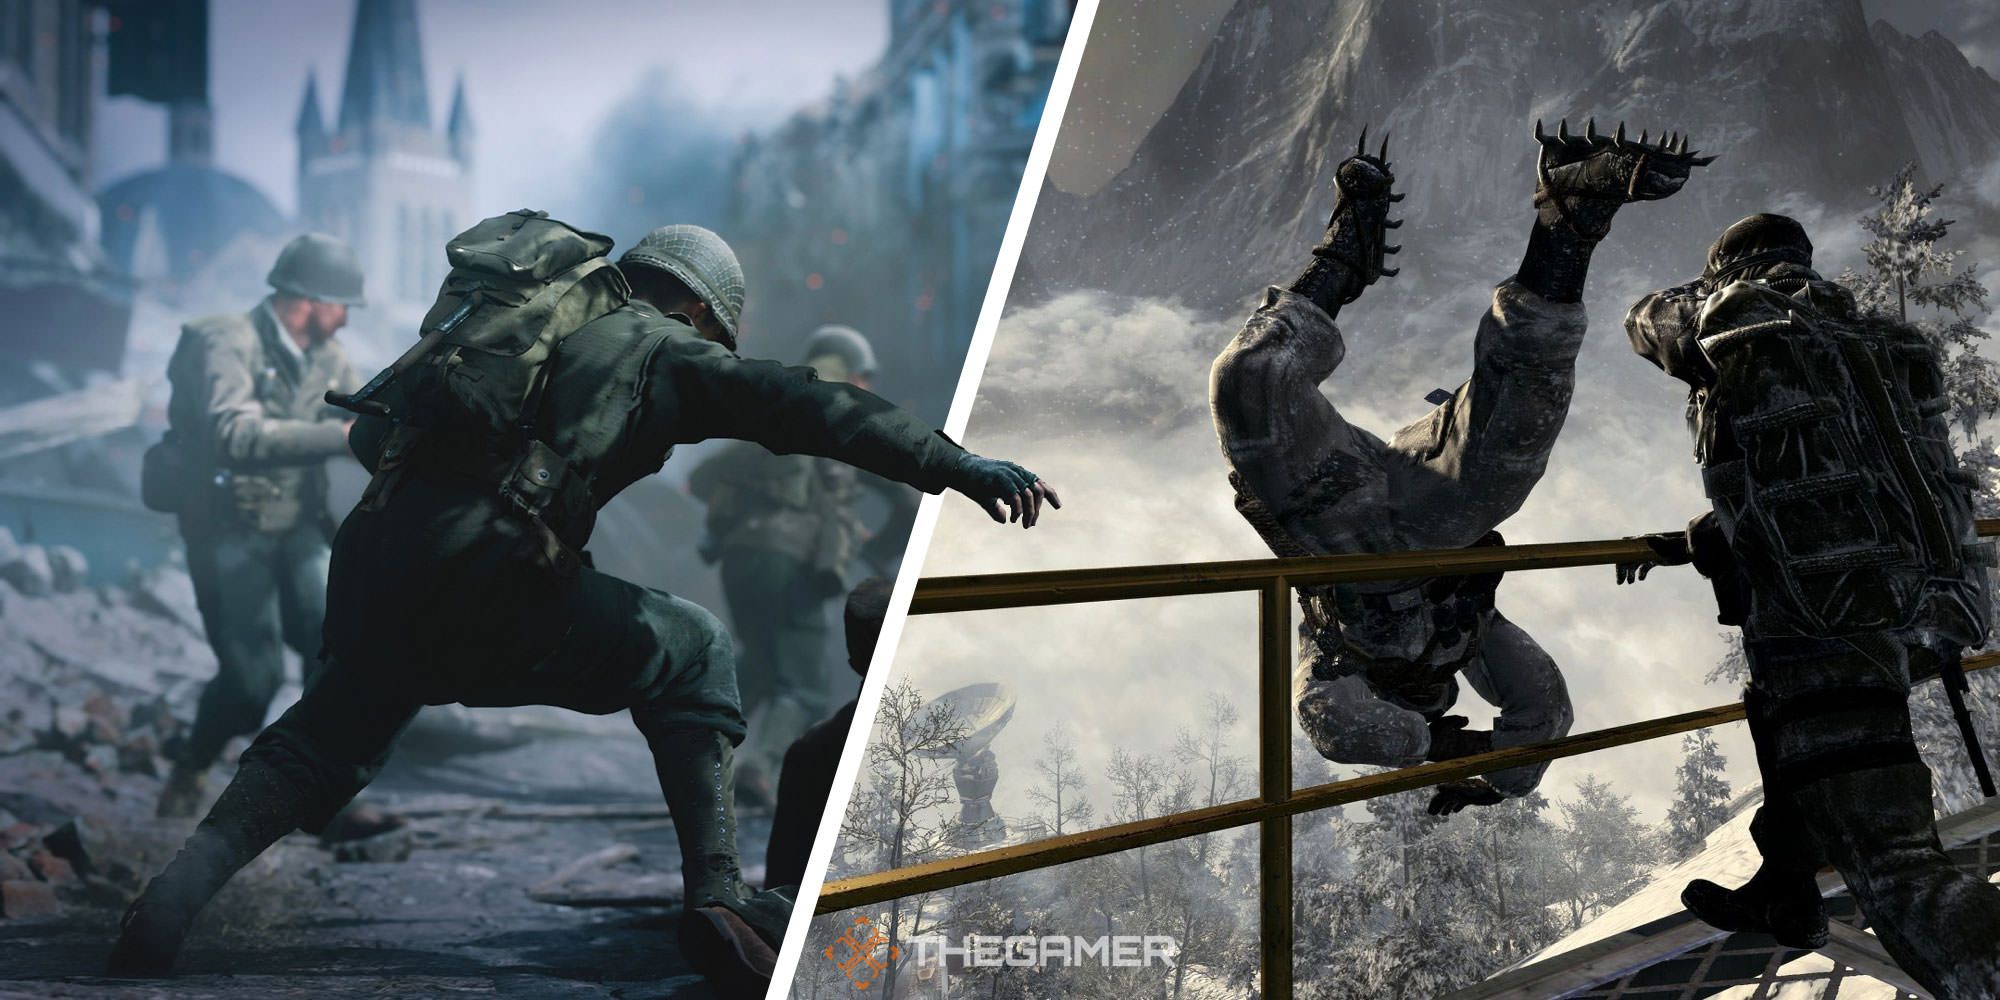 Игры 2014 февраль. Call of Duty timeline. Игра follow. Call of Duty комната. The hungover games 2014.